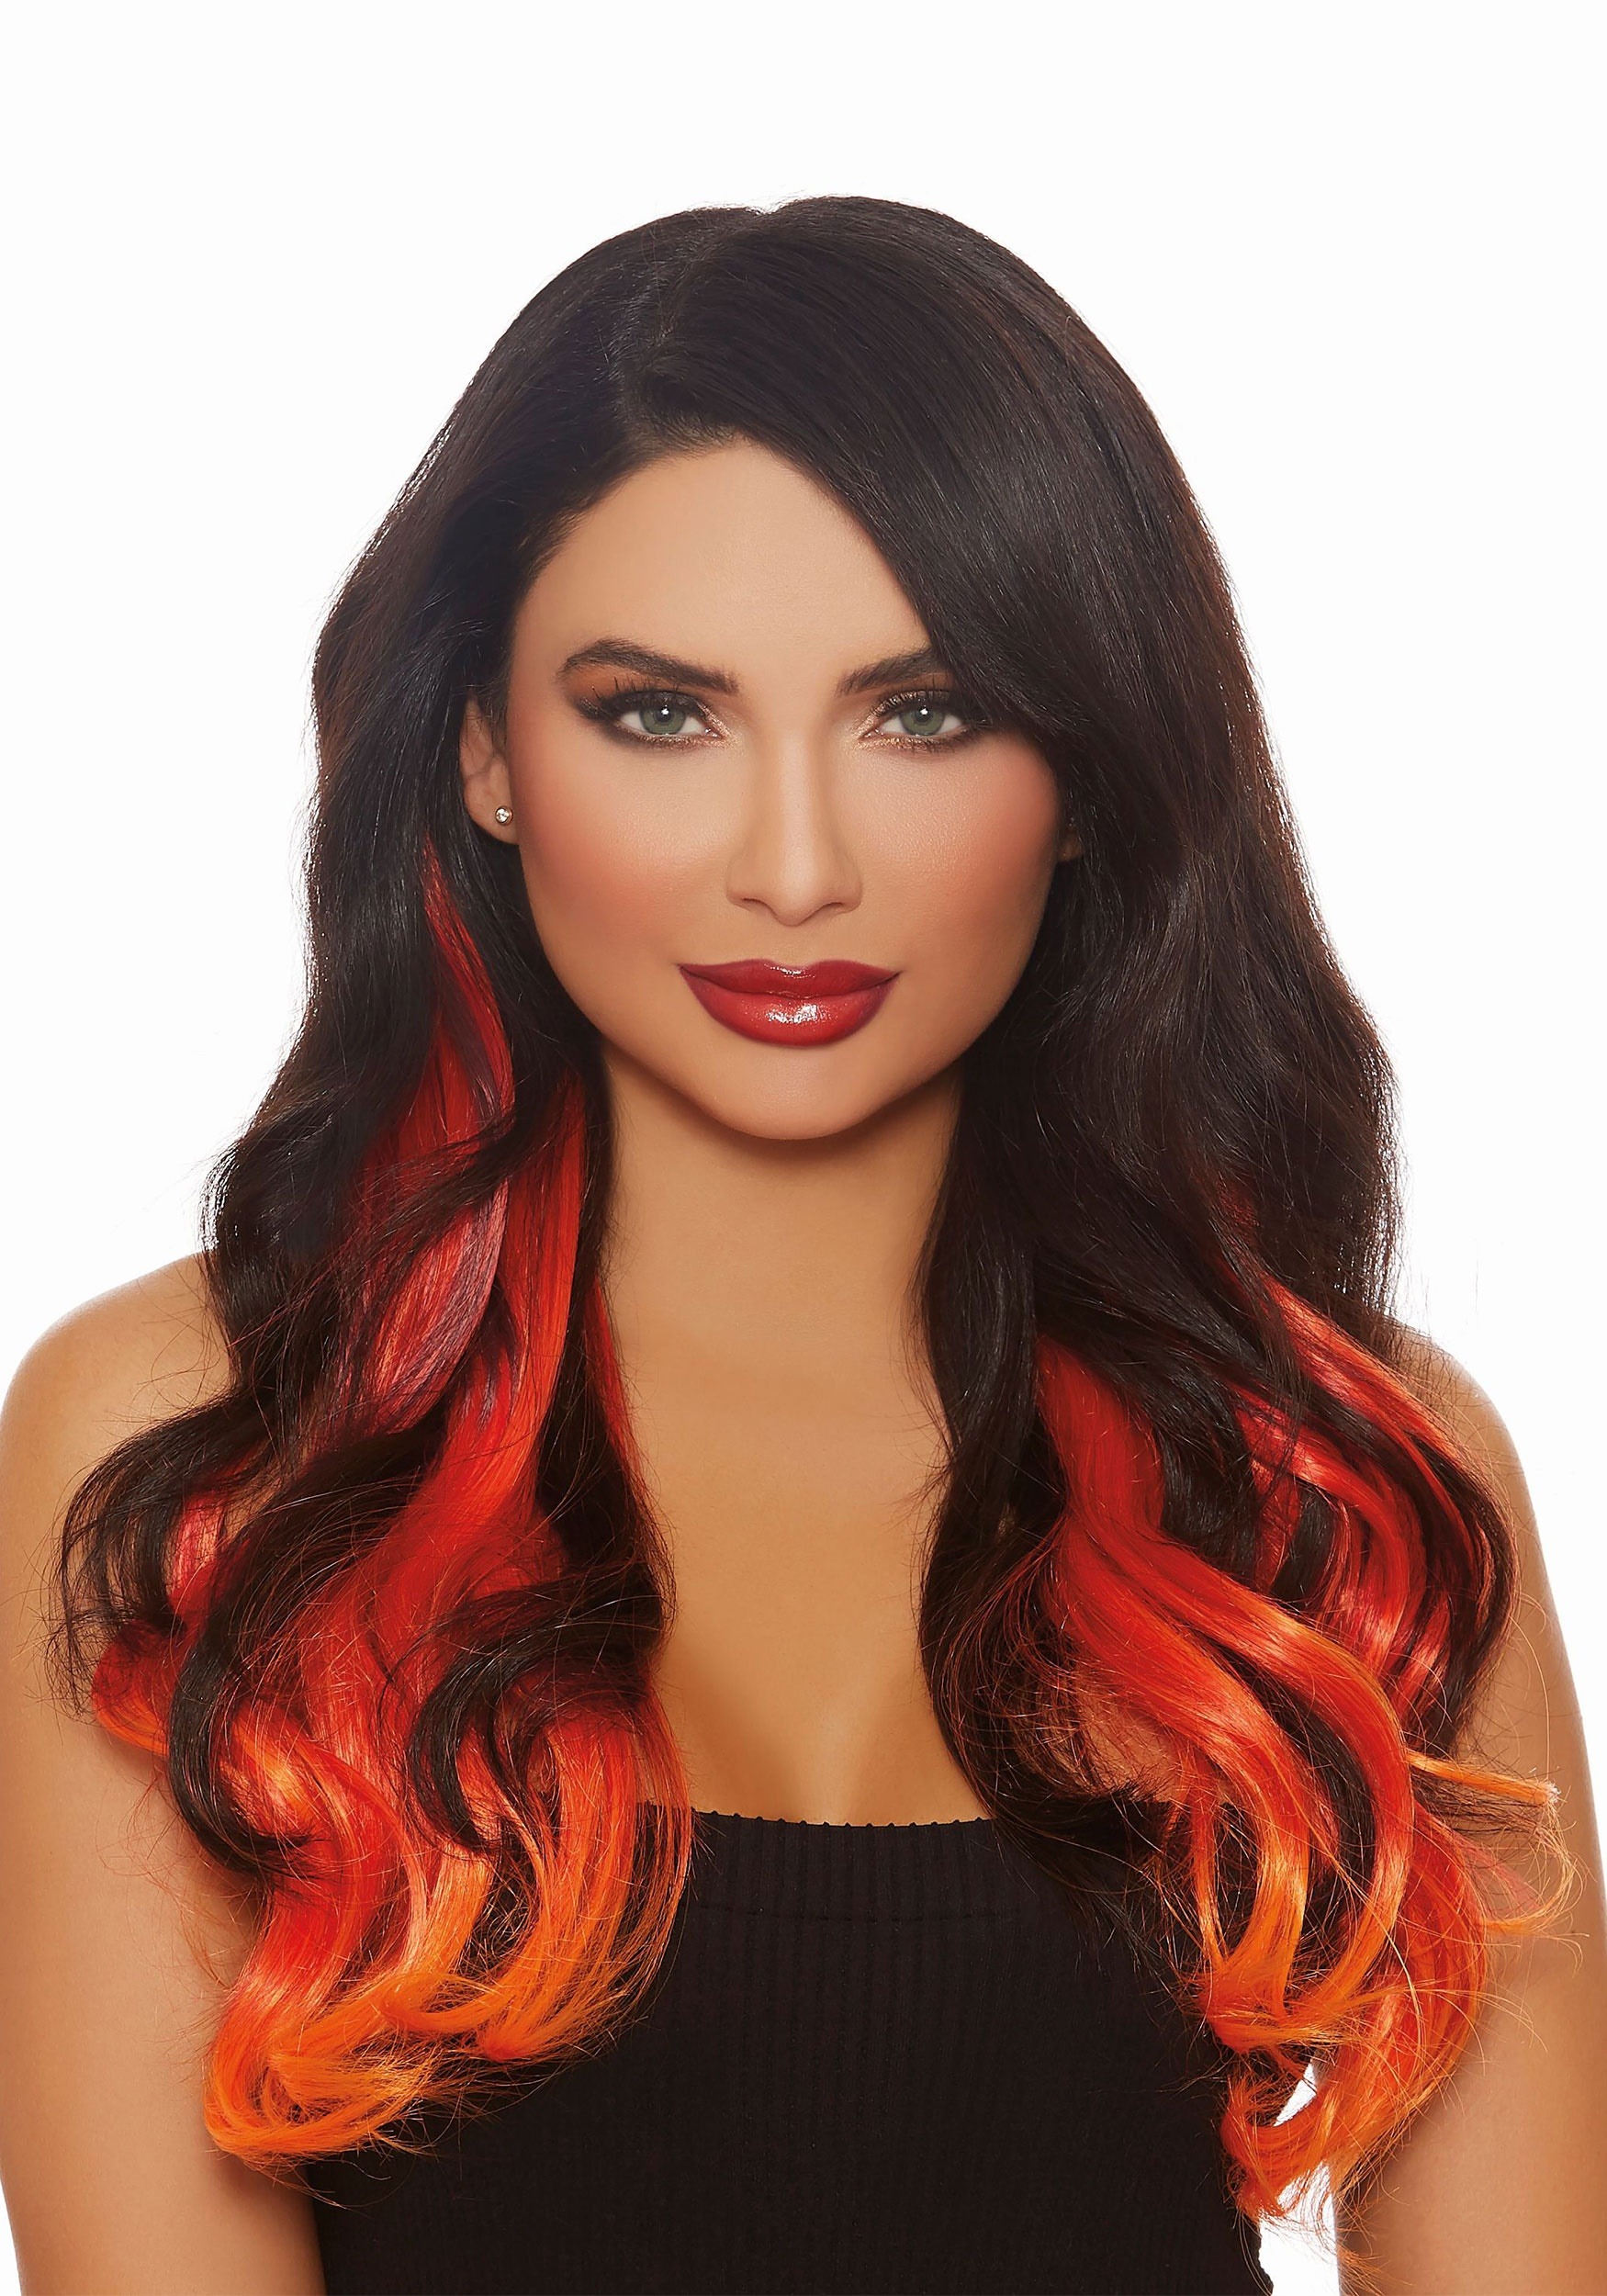 Black To Red To Orange Ombre Hair - What's New